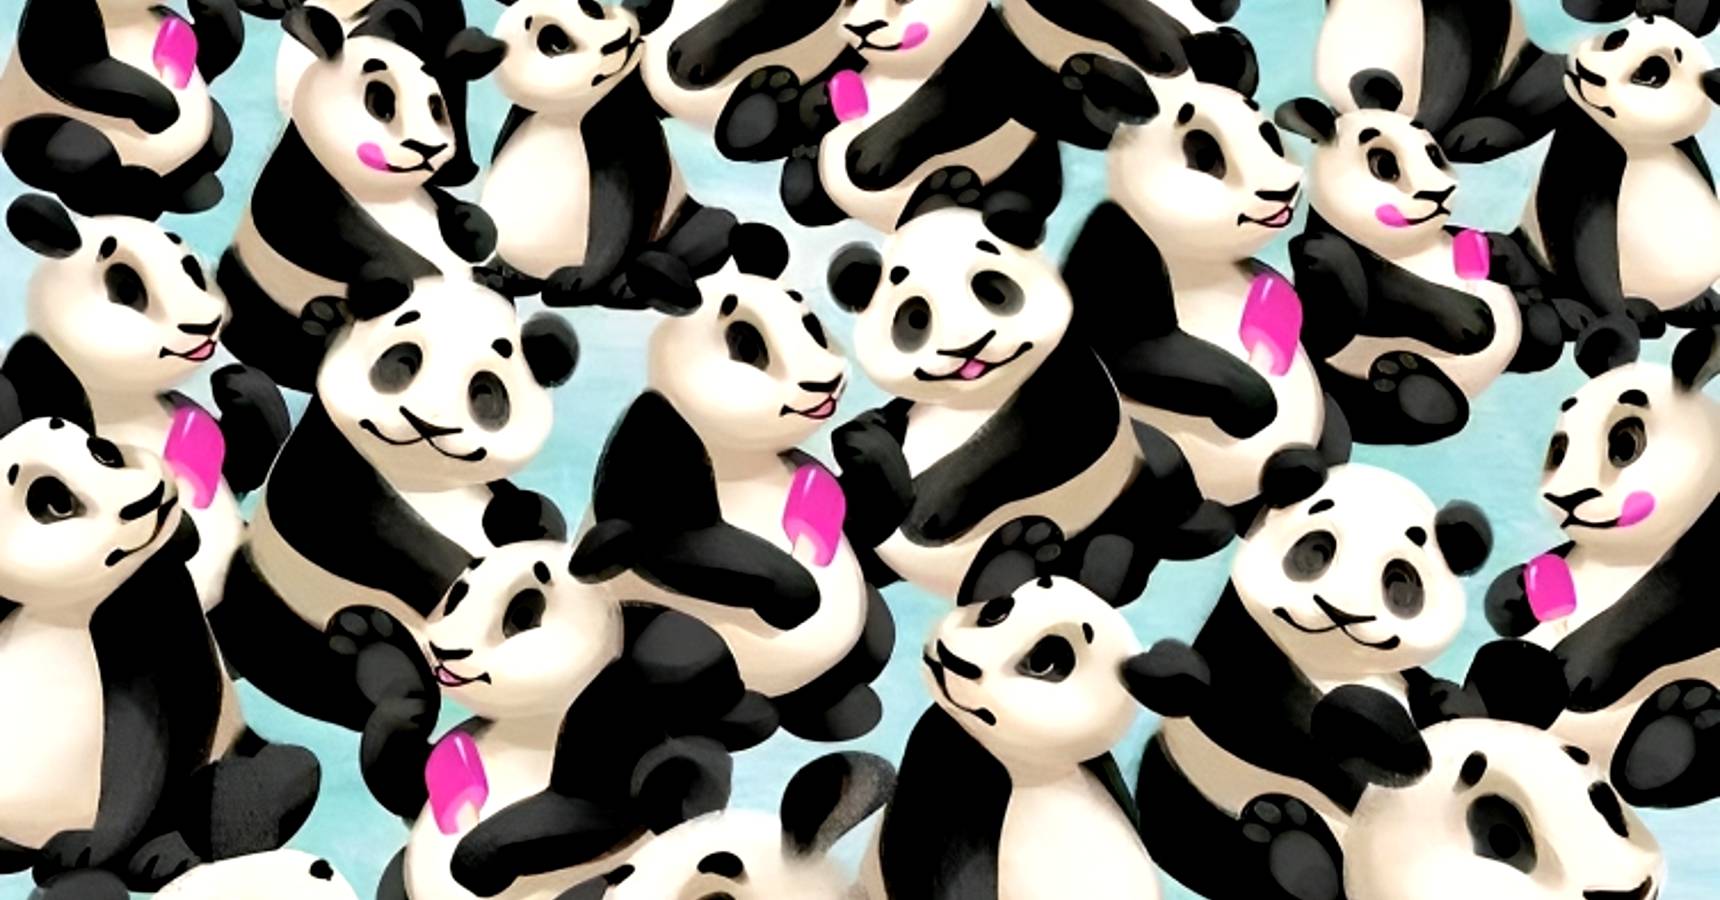 Optical illusion can you spot a Penguin among the Pandas within 7 seconds